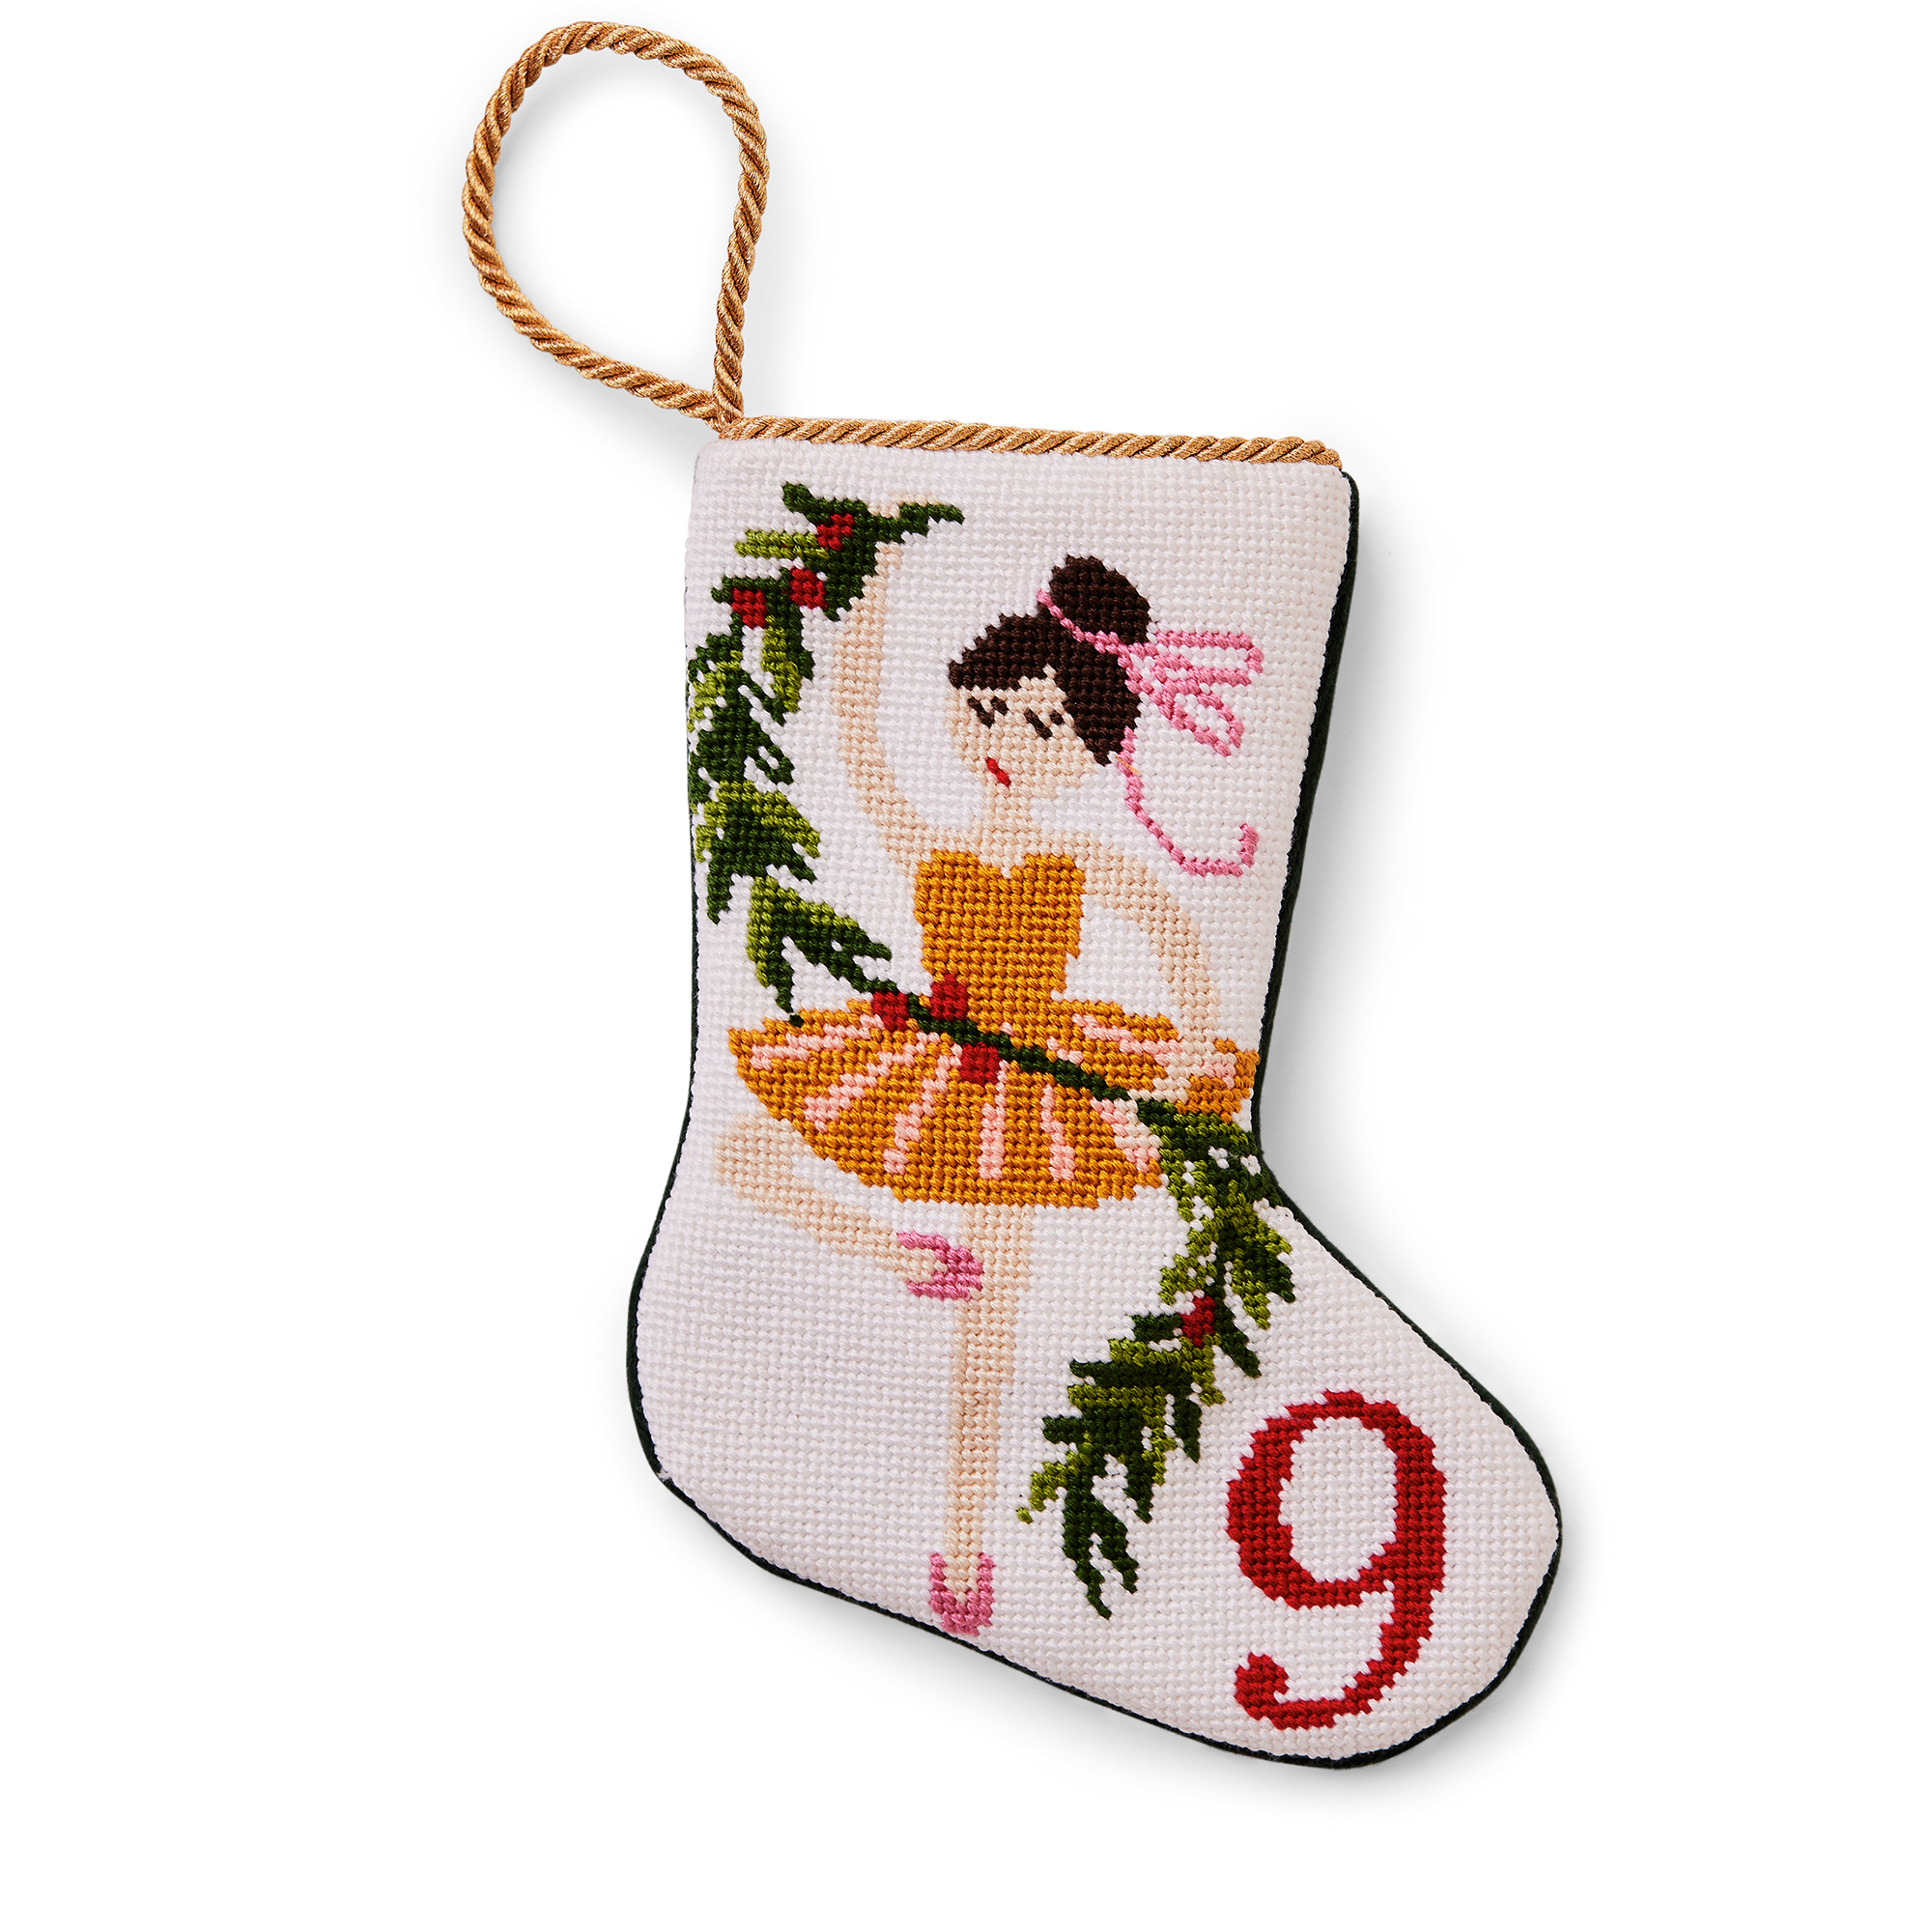 An intricately designed mini needlepoint stocking featuring the '9 Ladies Dancing' from the classic Christmas carol. This festive decoration adds a traditional and charming touch to your holiday decor. Perfect as tree ornaments, place settings, or for holding special gifts.